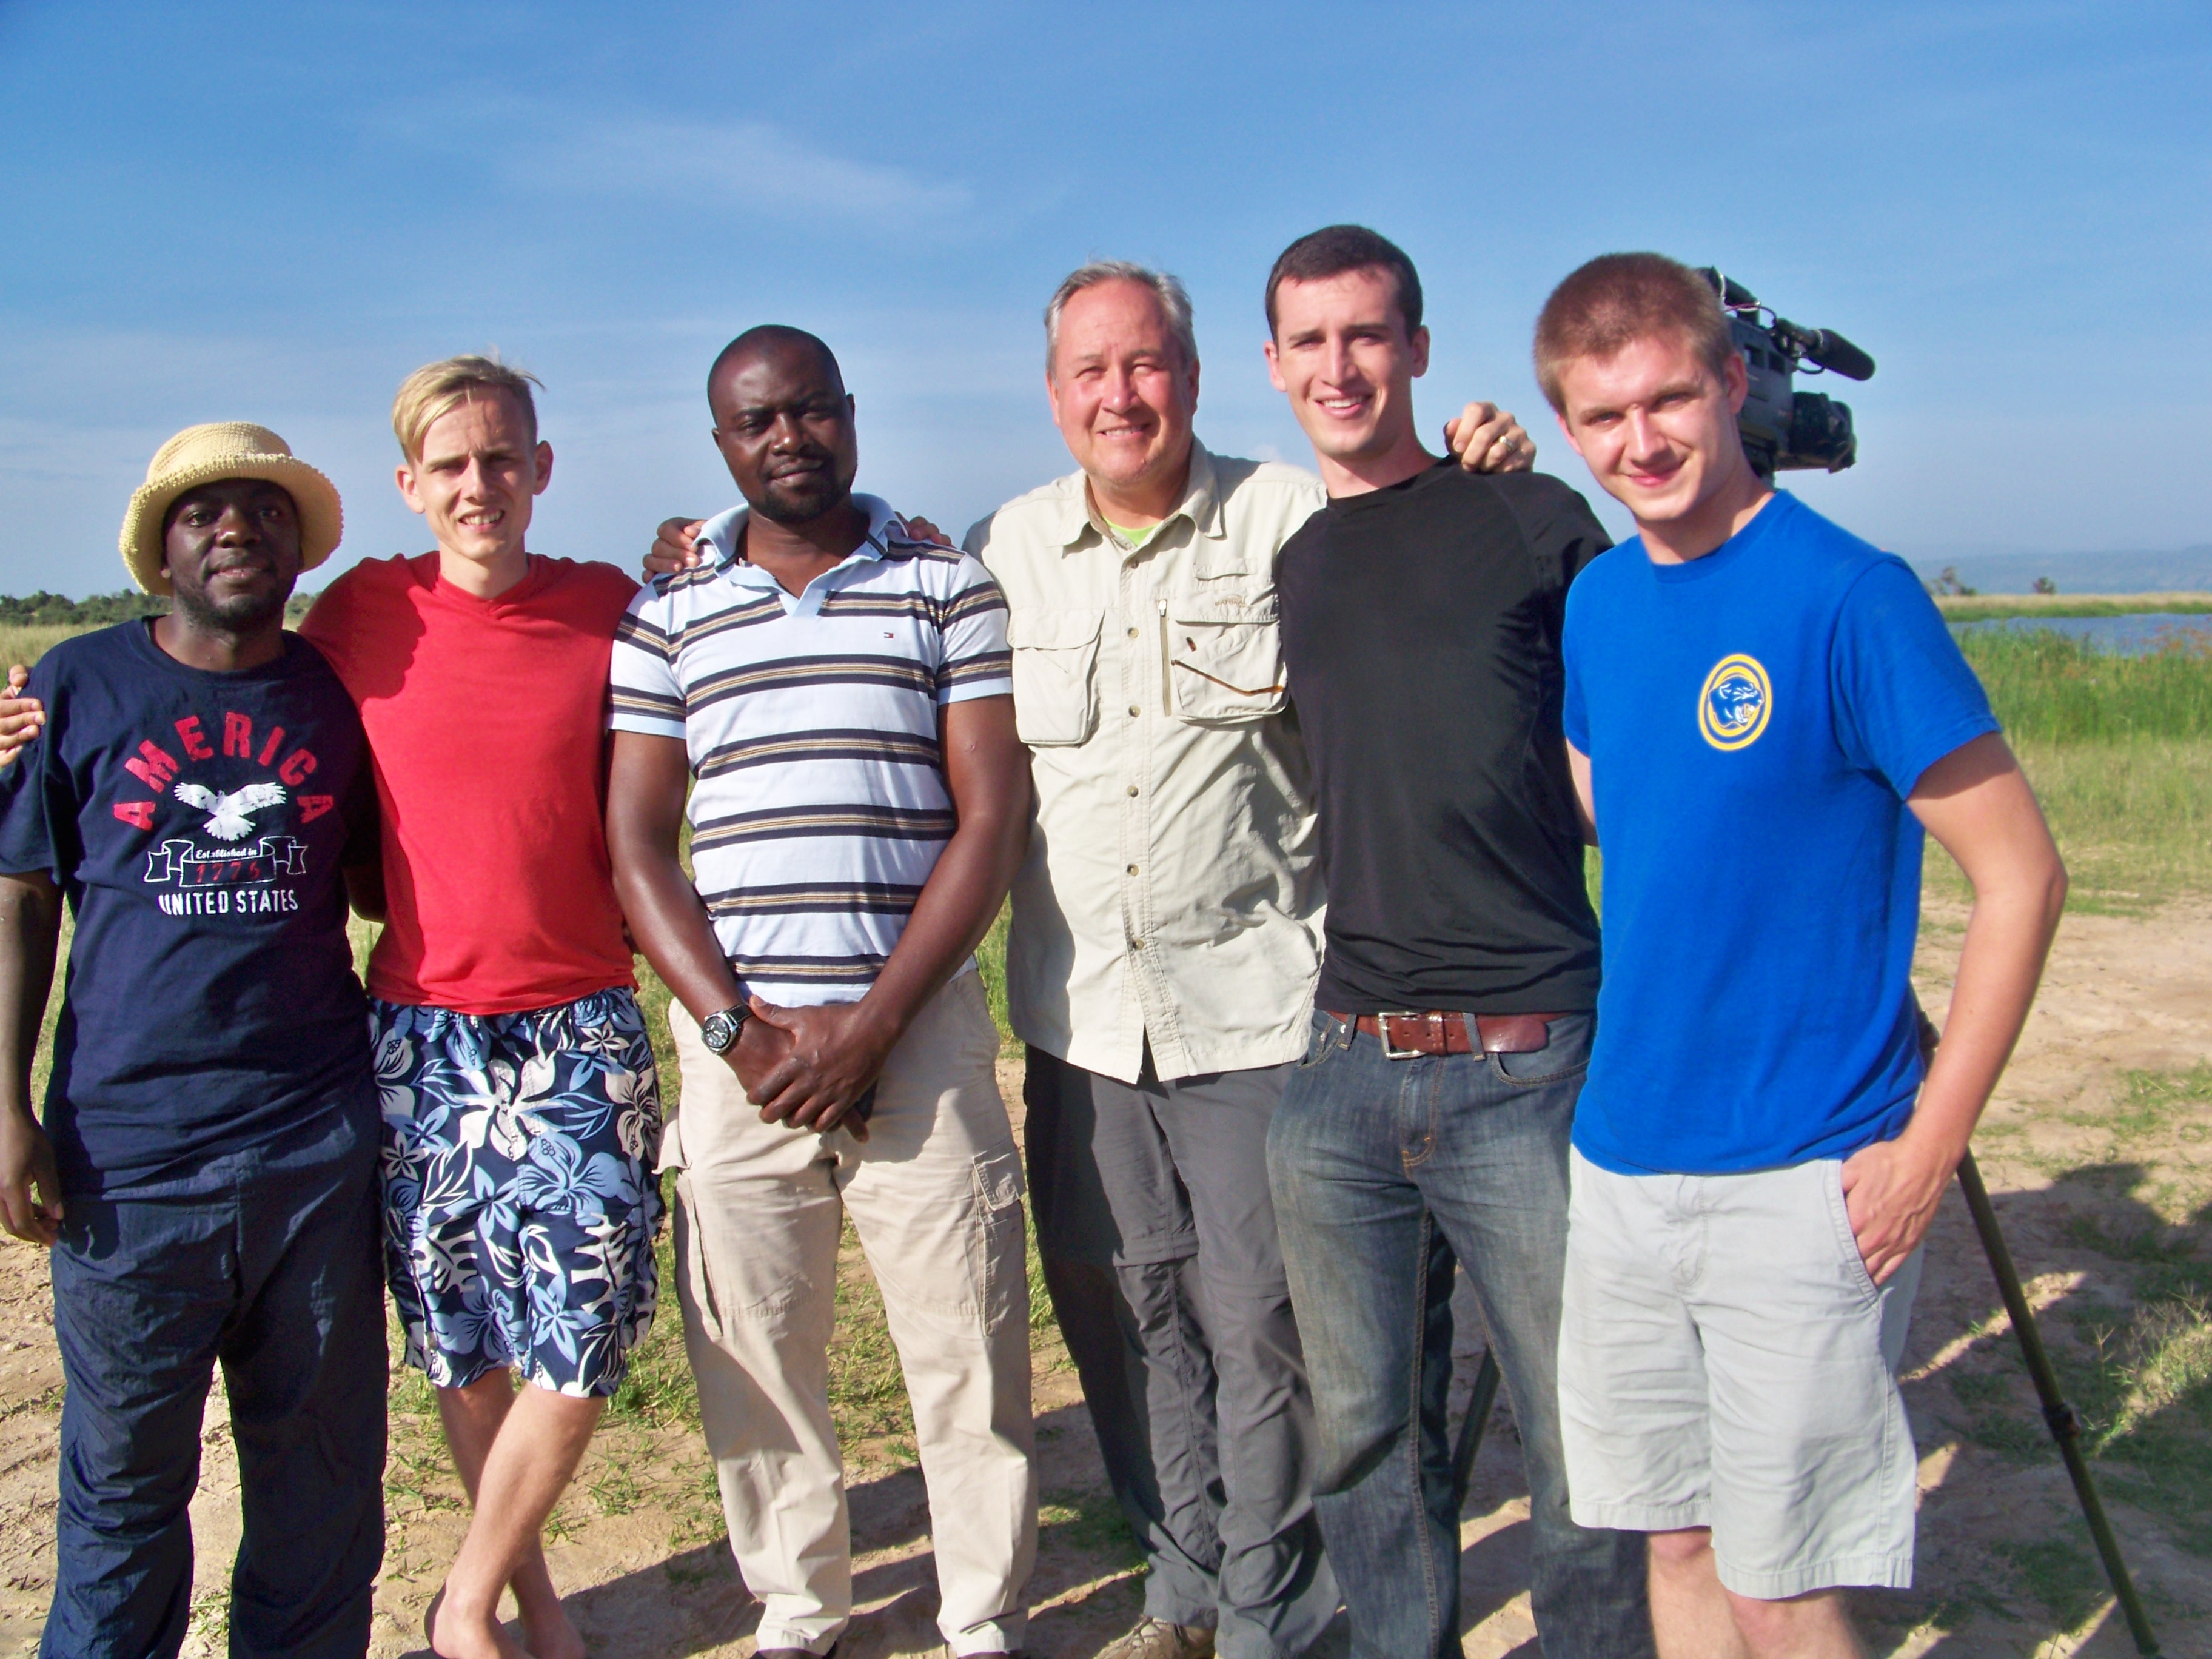 With the Road to Hope film crew in Northern Uganda (Summer 2013).